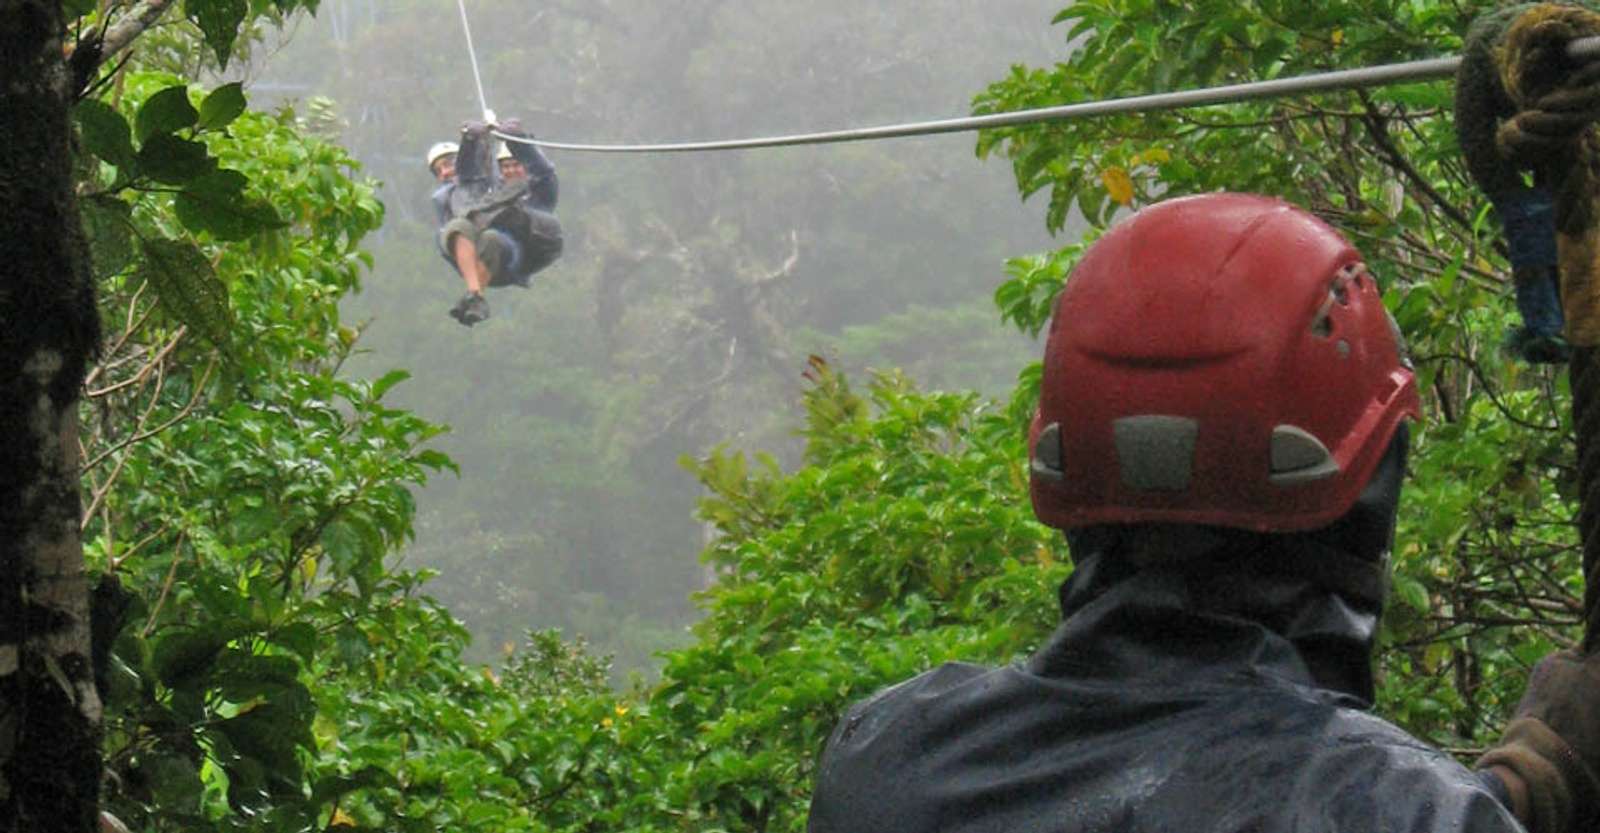 Nat Hab guests zip lining, Monteverde Cloud Forest, Costa Rica.